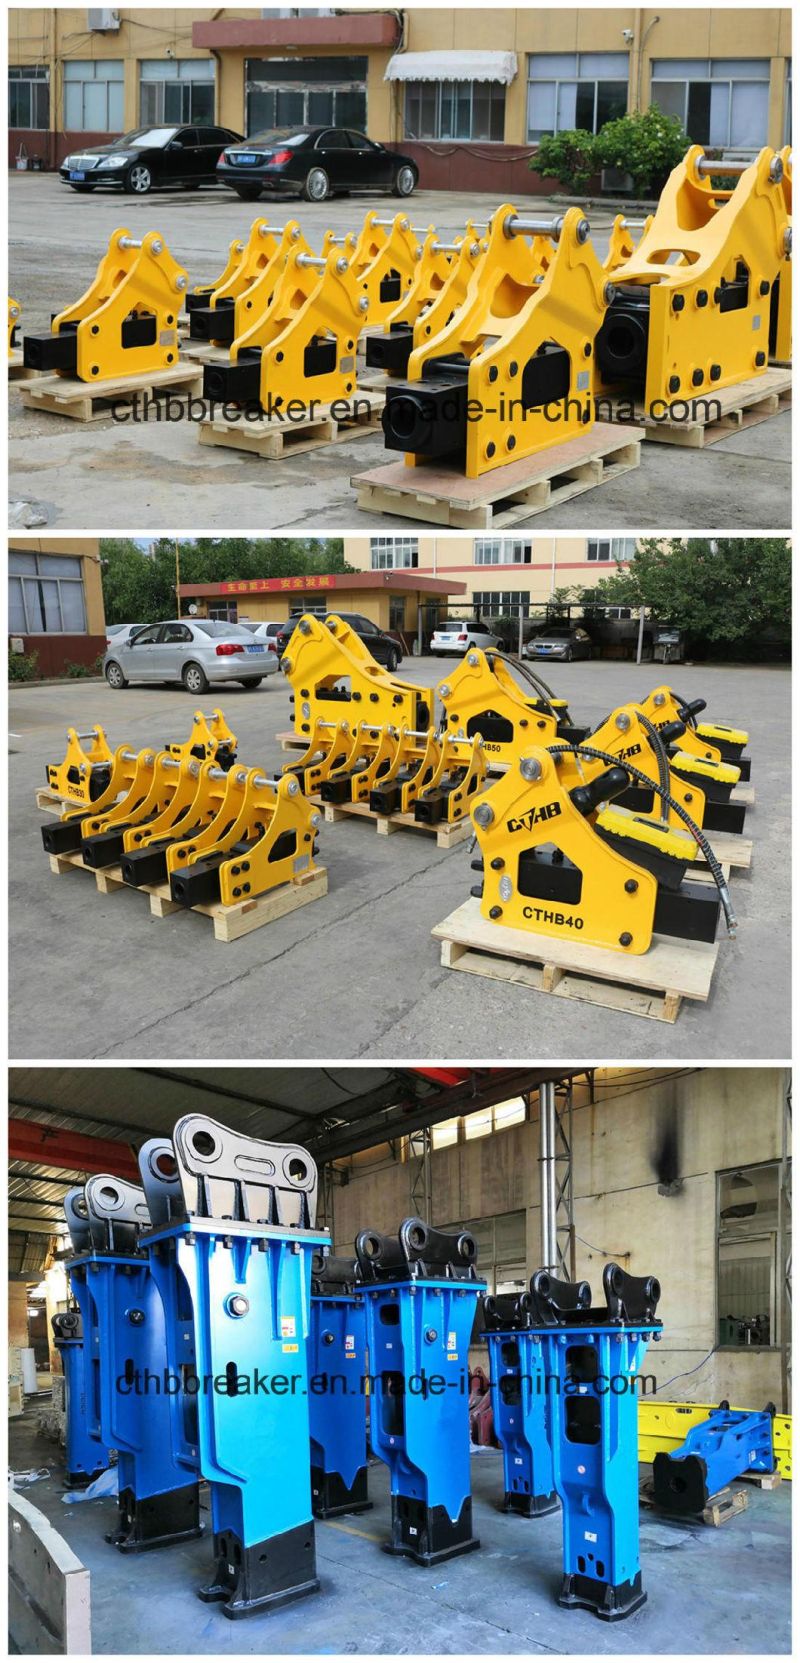 Hydraulic Earth Drill Auger Drill